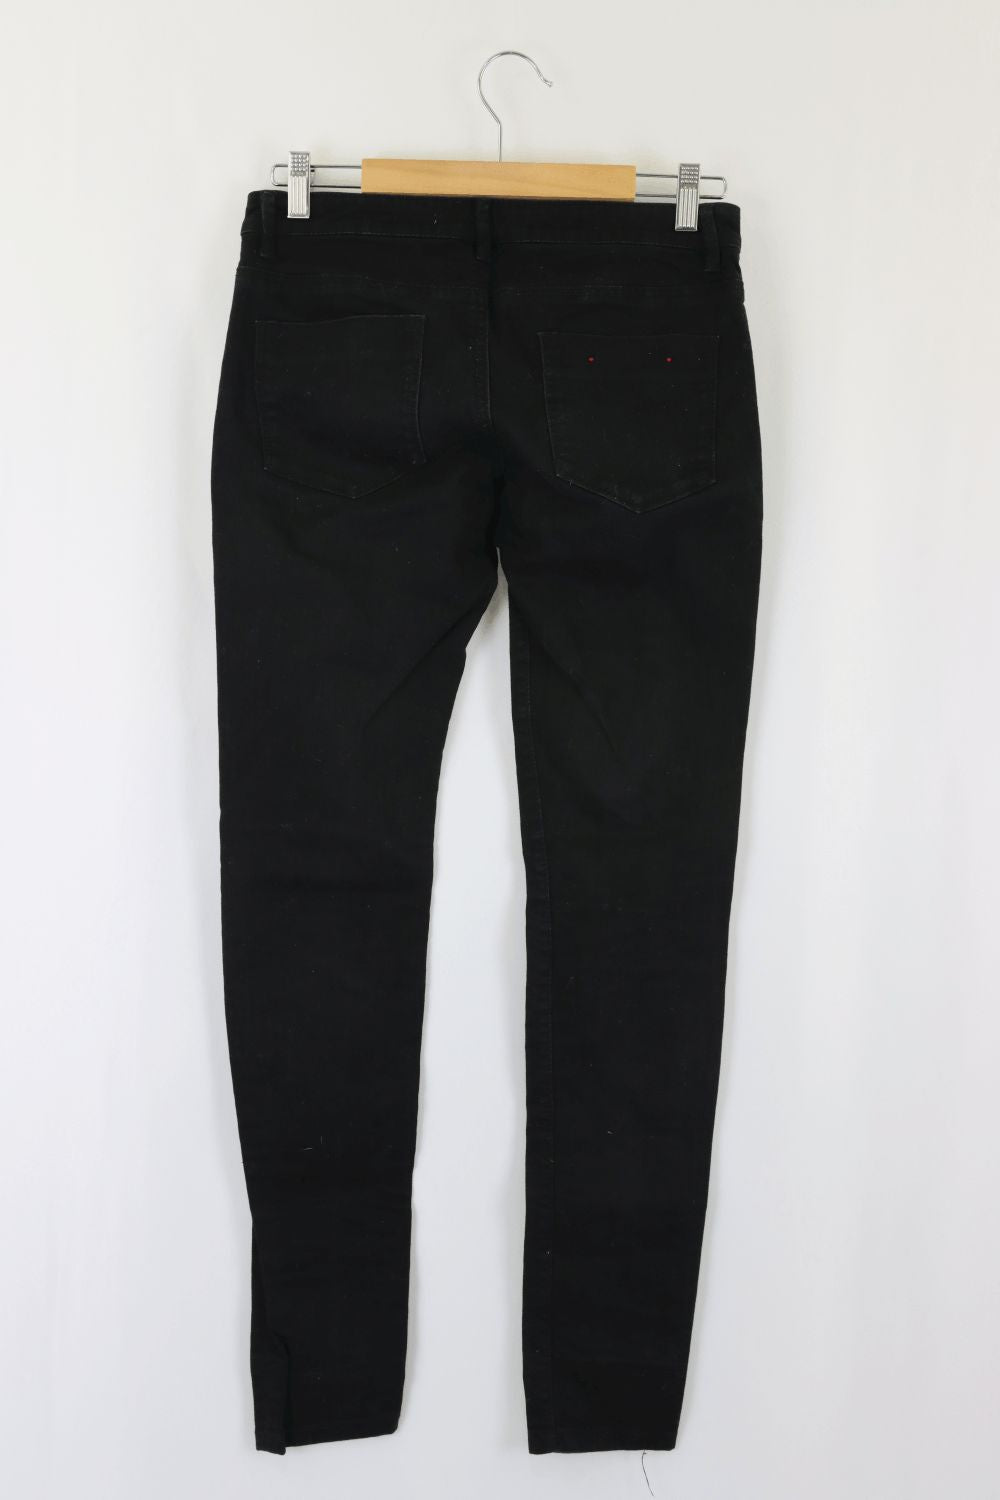 Country Road Black Jeans 8